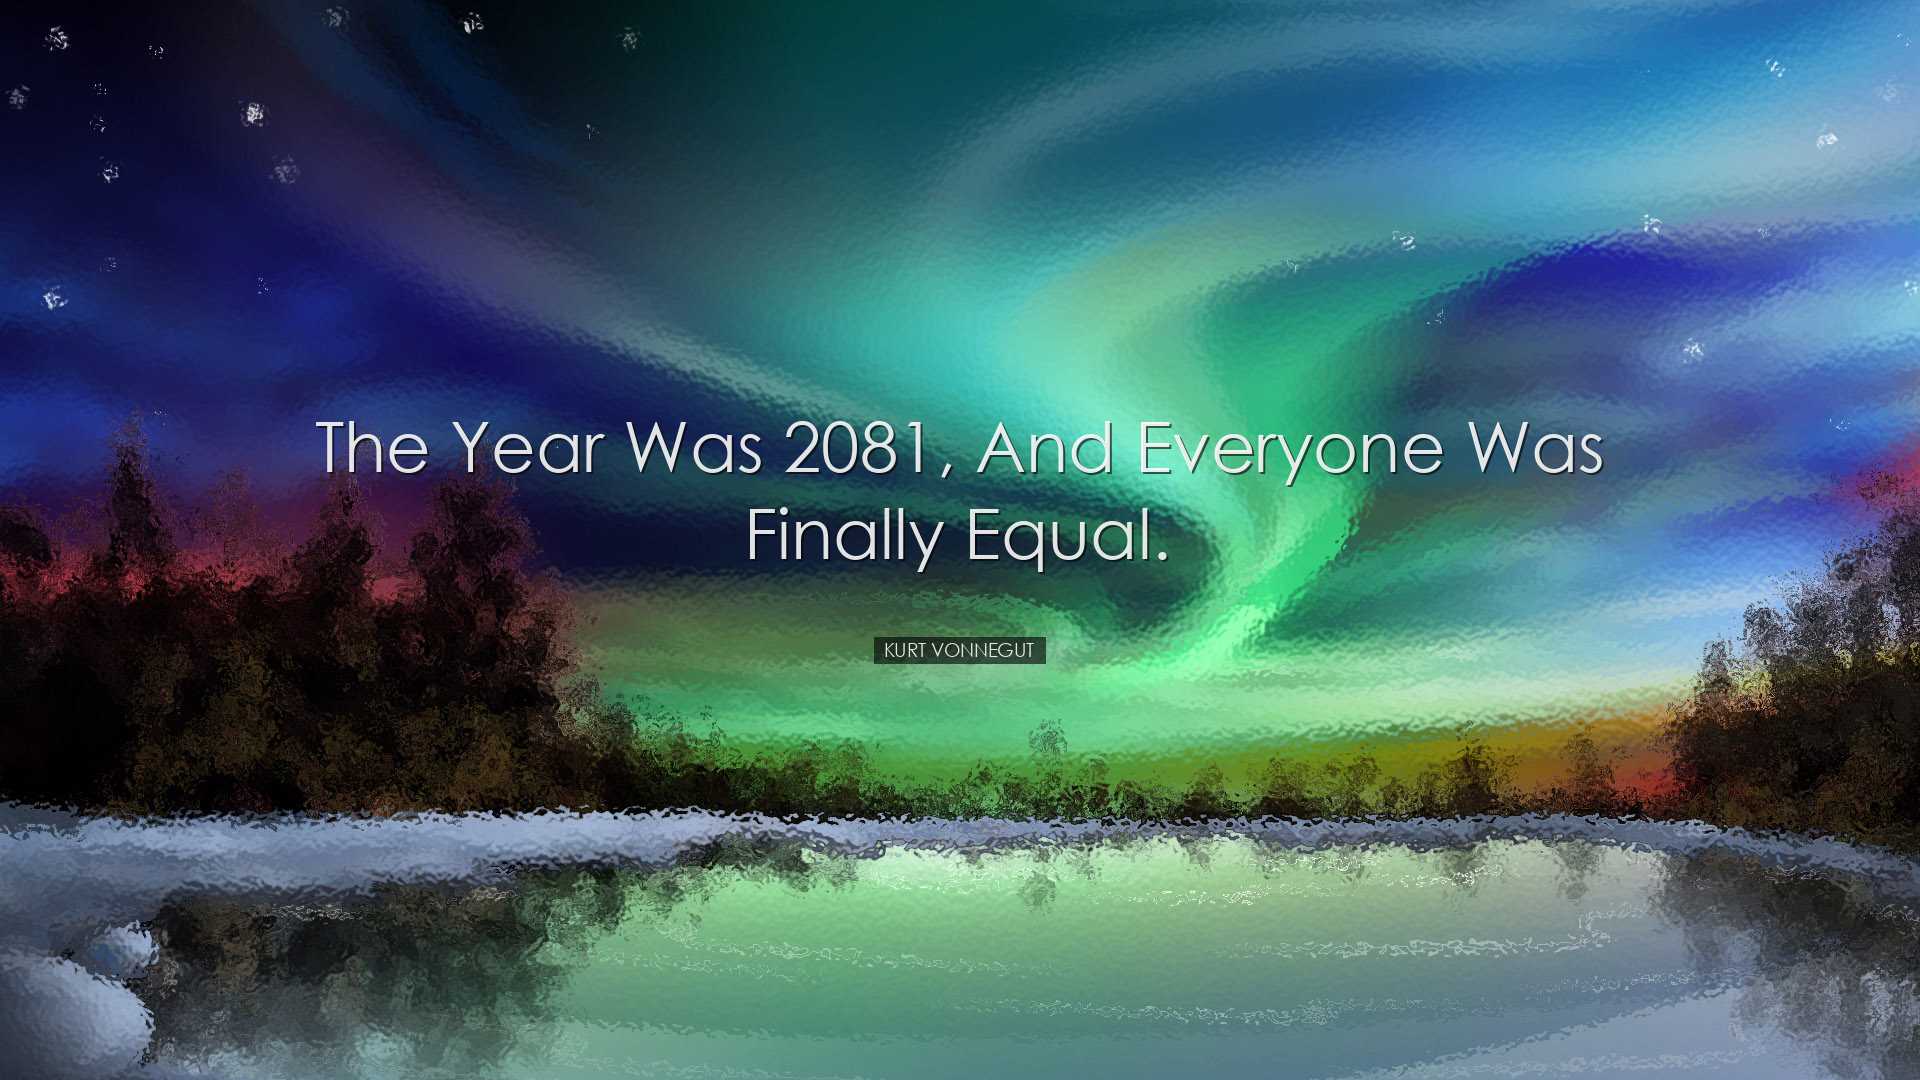 The year was 2081, and everyone was finally equal. - Kurt Vonnegut